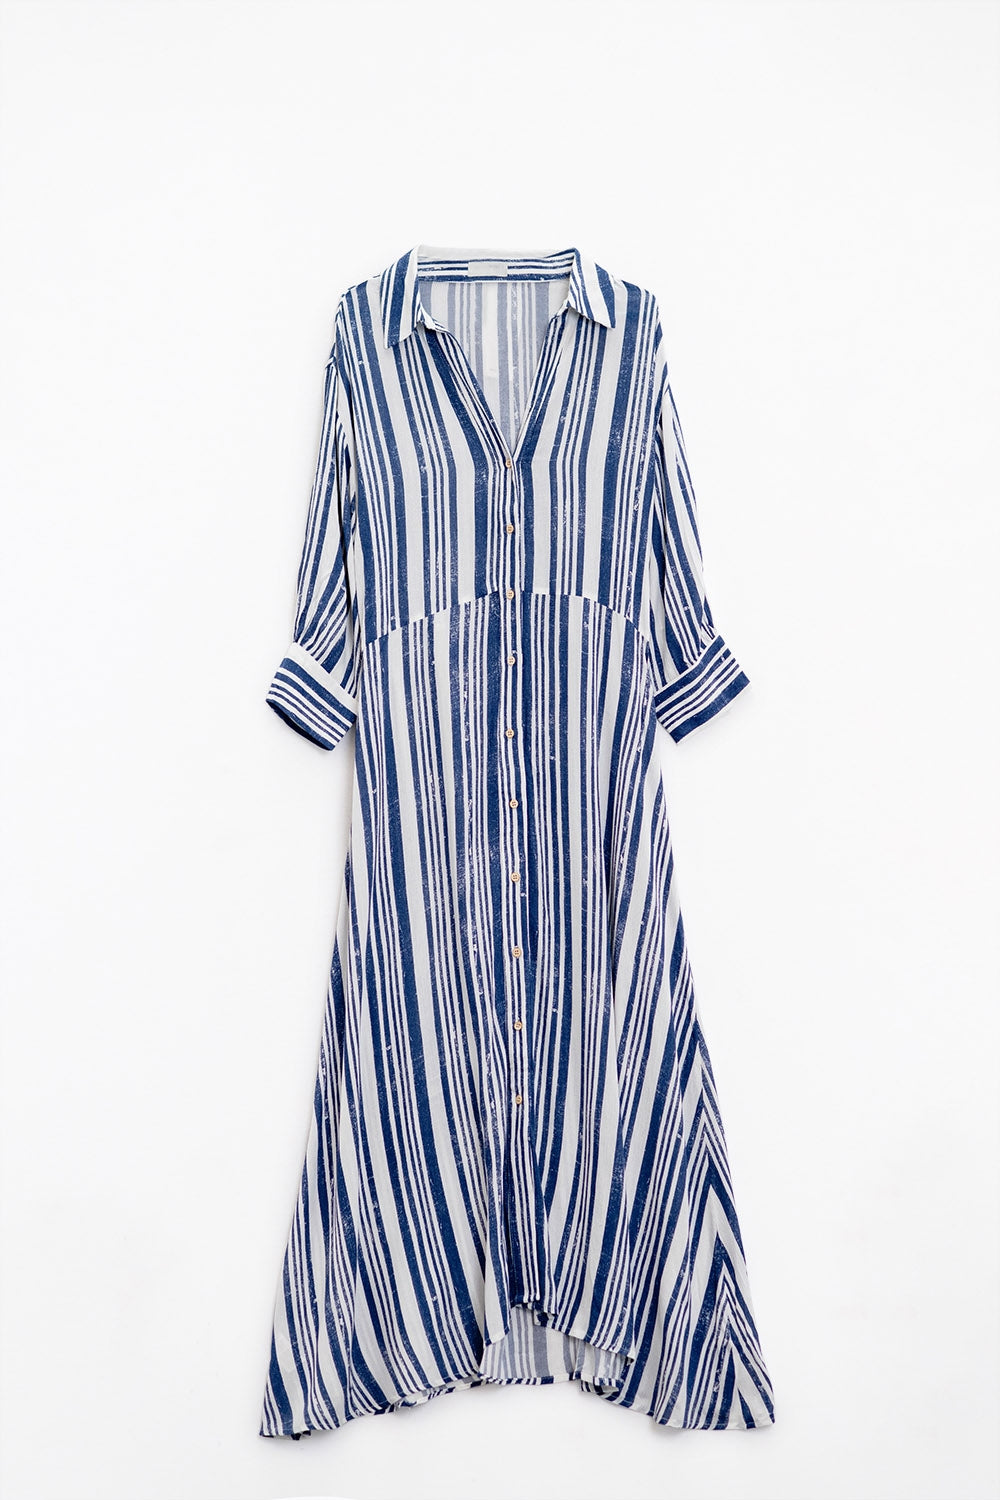 Stripped Maxi Shirt Dress with 3/4 Sleeve and Belt in Blue and White